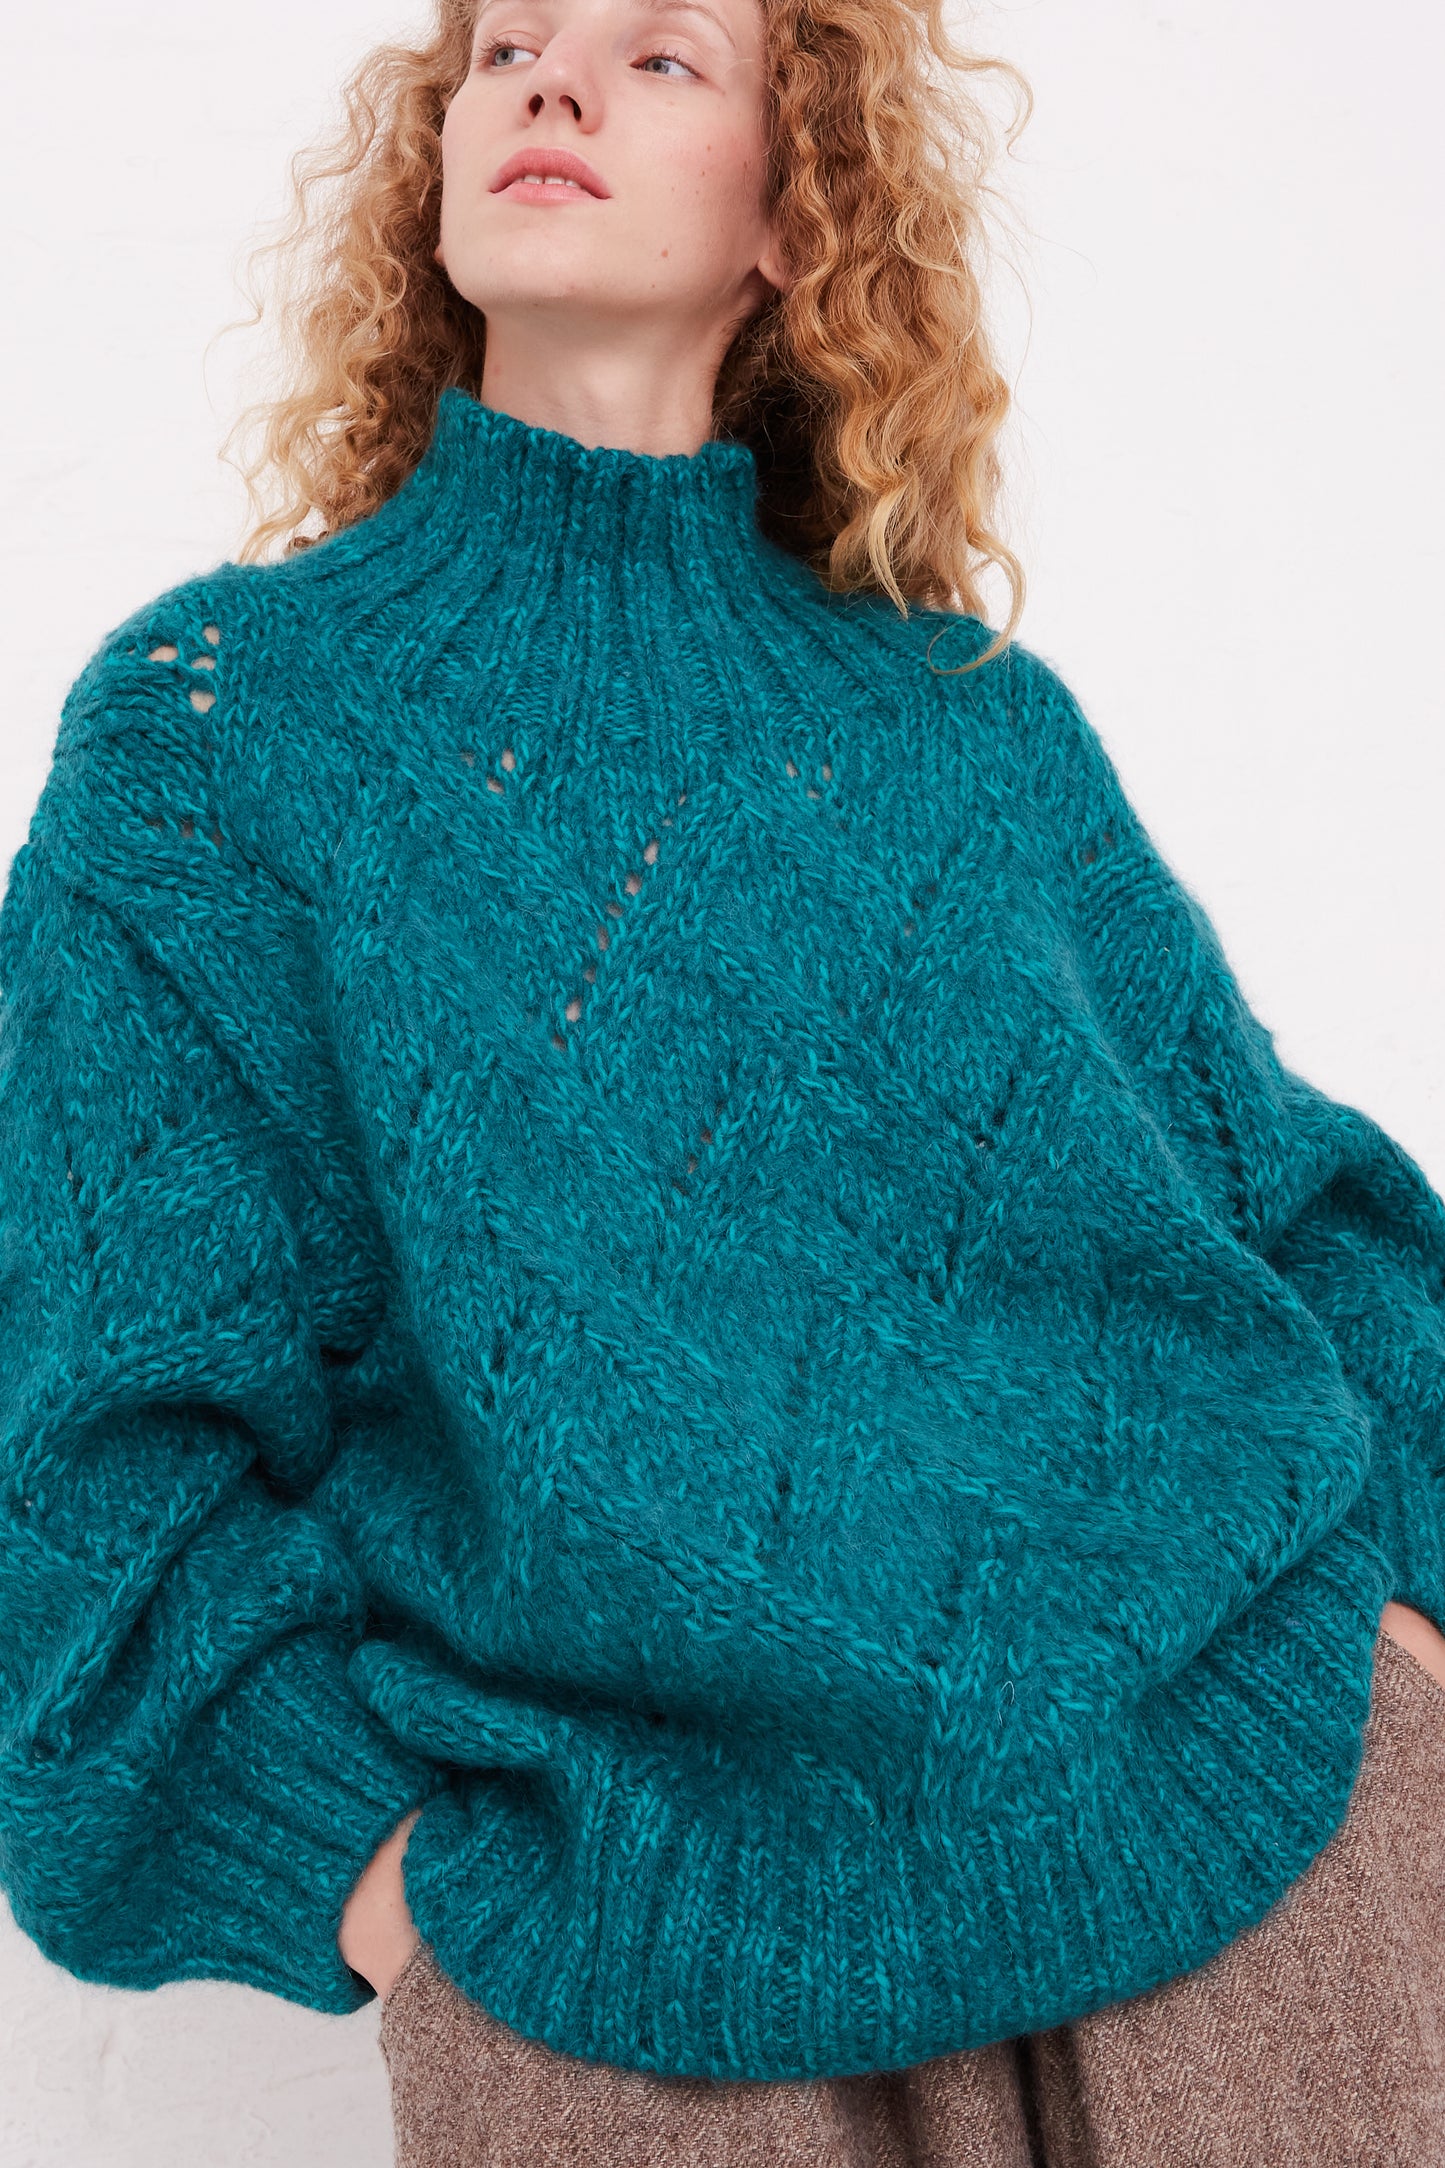 A woman wearing an oversized, Ichi Antiquités Hand-Knit Turtleneck in Green Teal sweater.